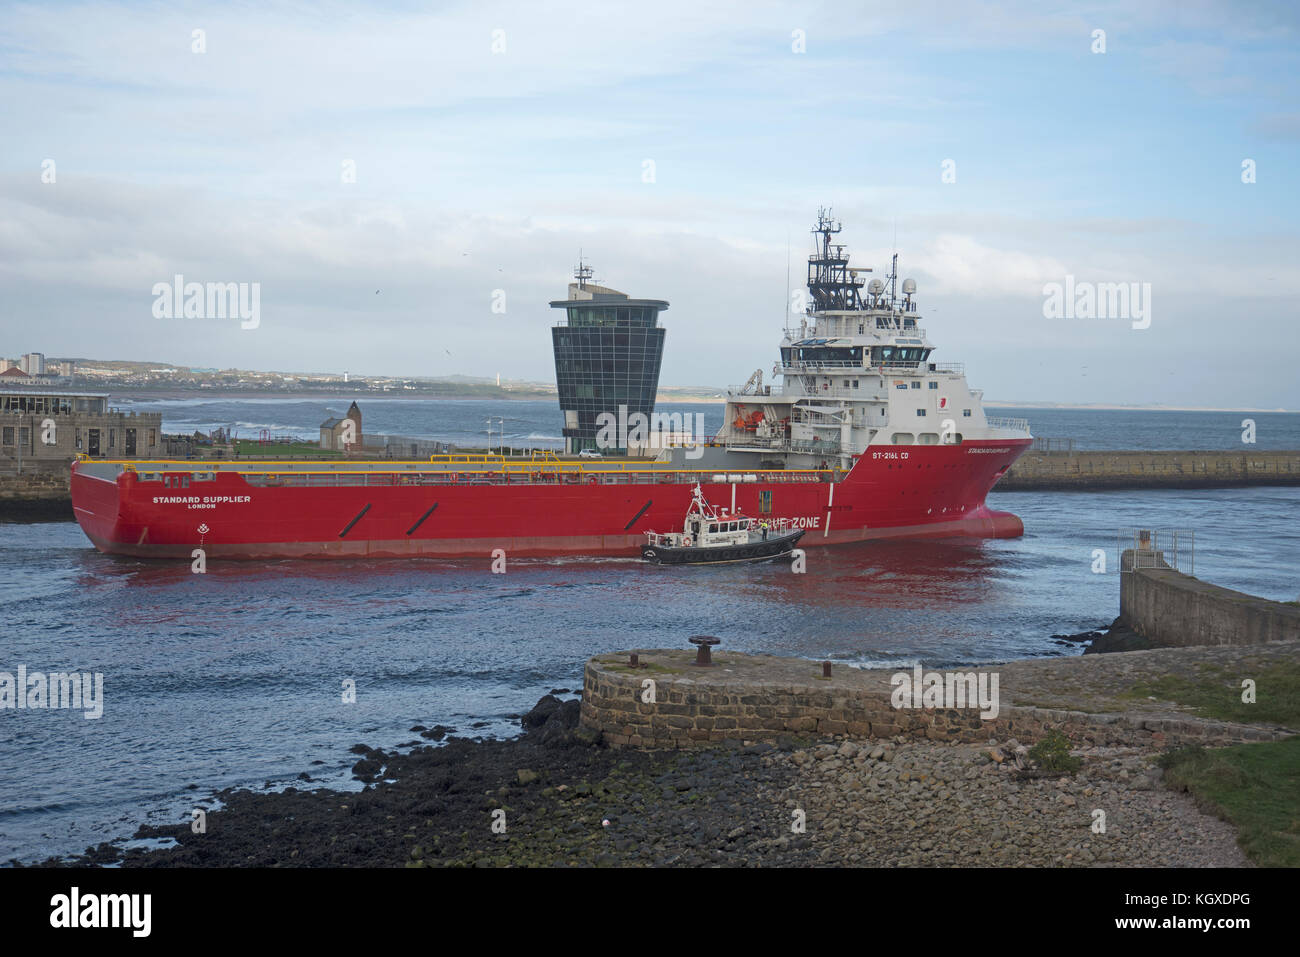 Offshore supply vessel 'Standard Princess' departing from Aberdeen Harbour Docks for the North Sea. Stock Photo